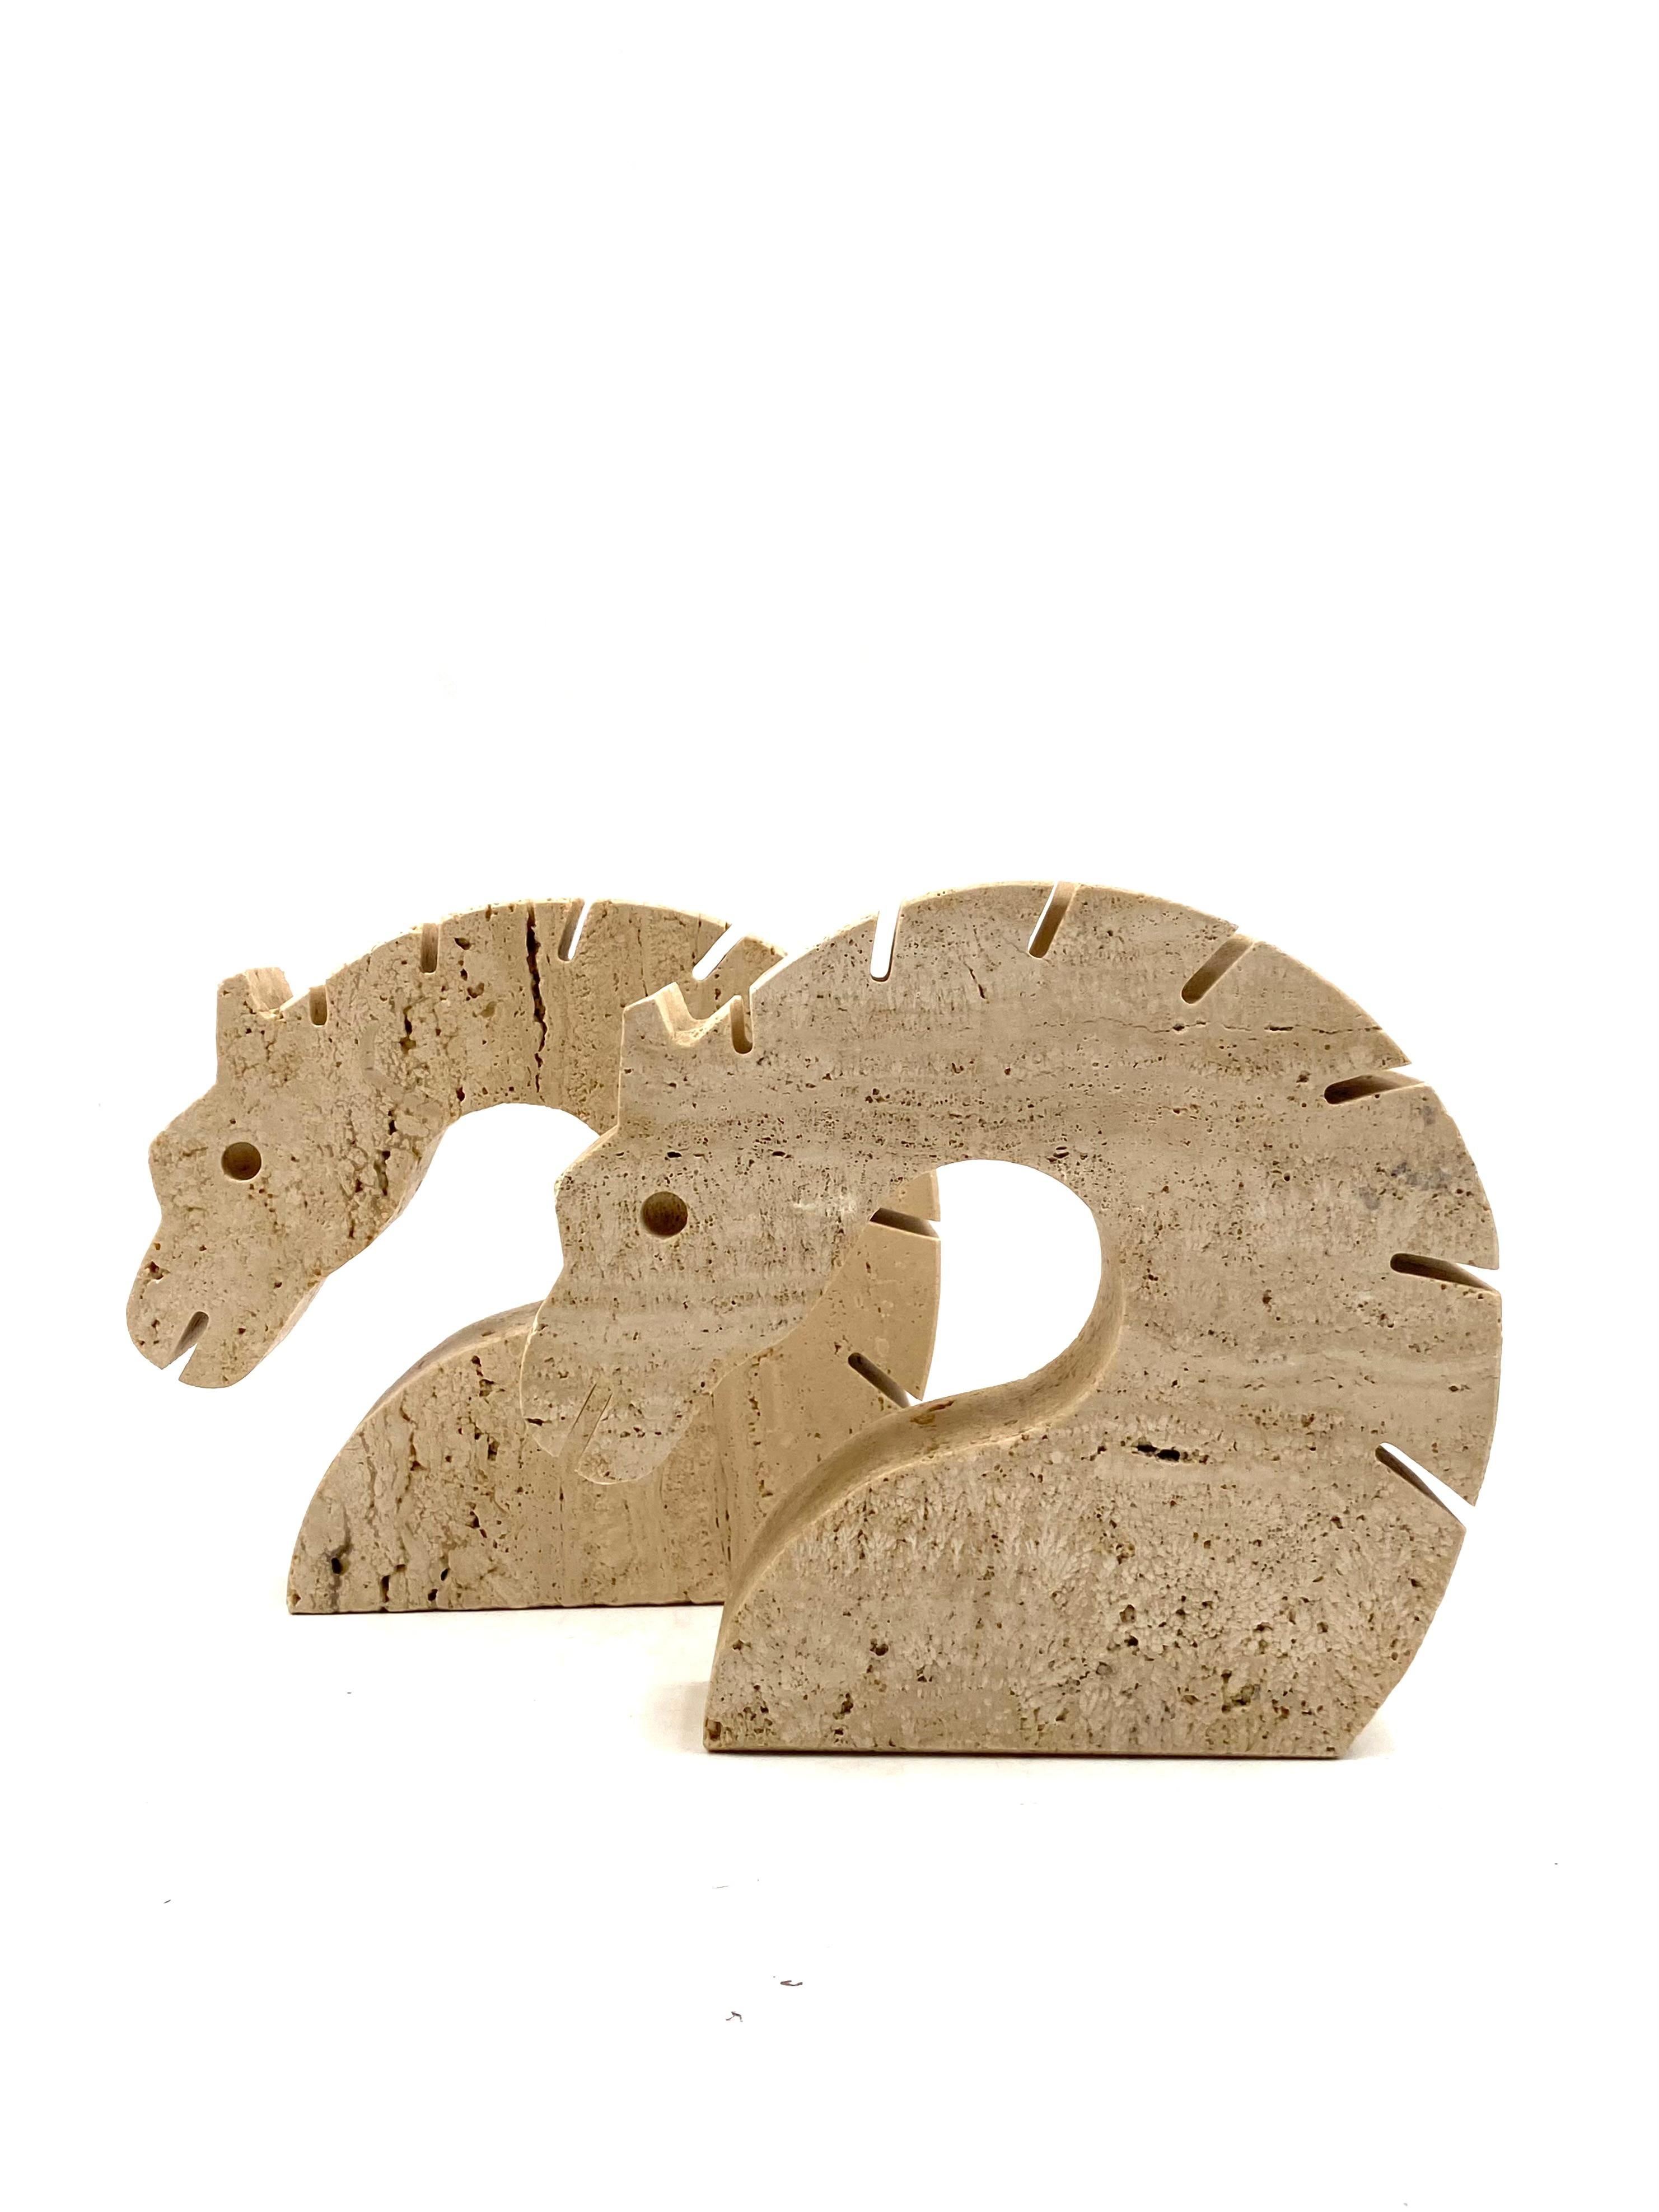 Brutalist Horses / Dragons travertine bookends.

Designed and manufactured by Fratelli Mannelli, Italy, 1970s.

Measures : H 16.5 cm 4 x 17 cm

Conditions: Excellent consistent with age and use.